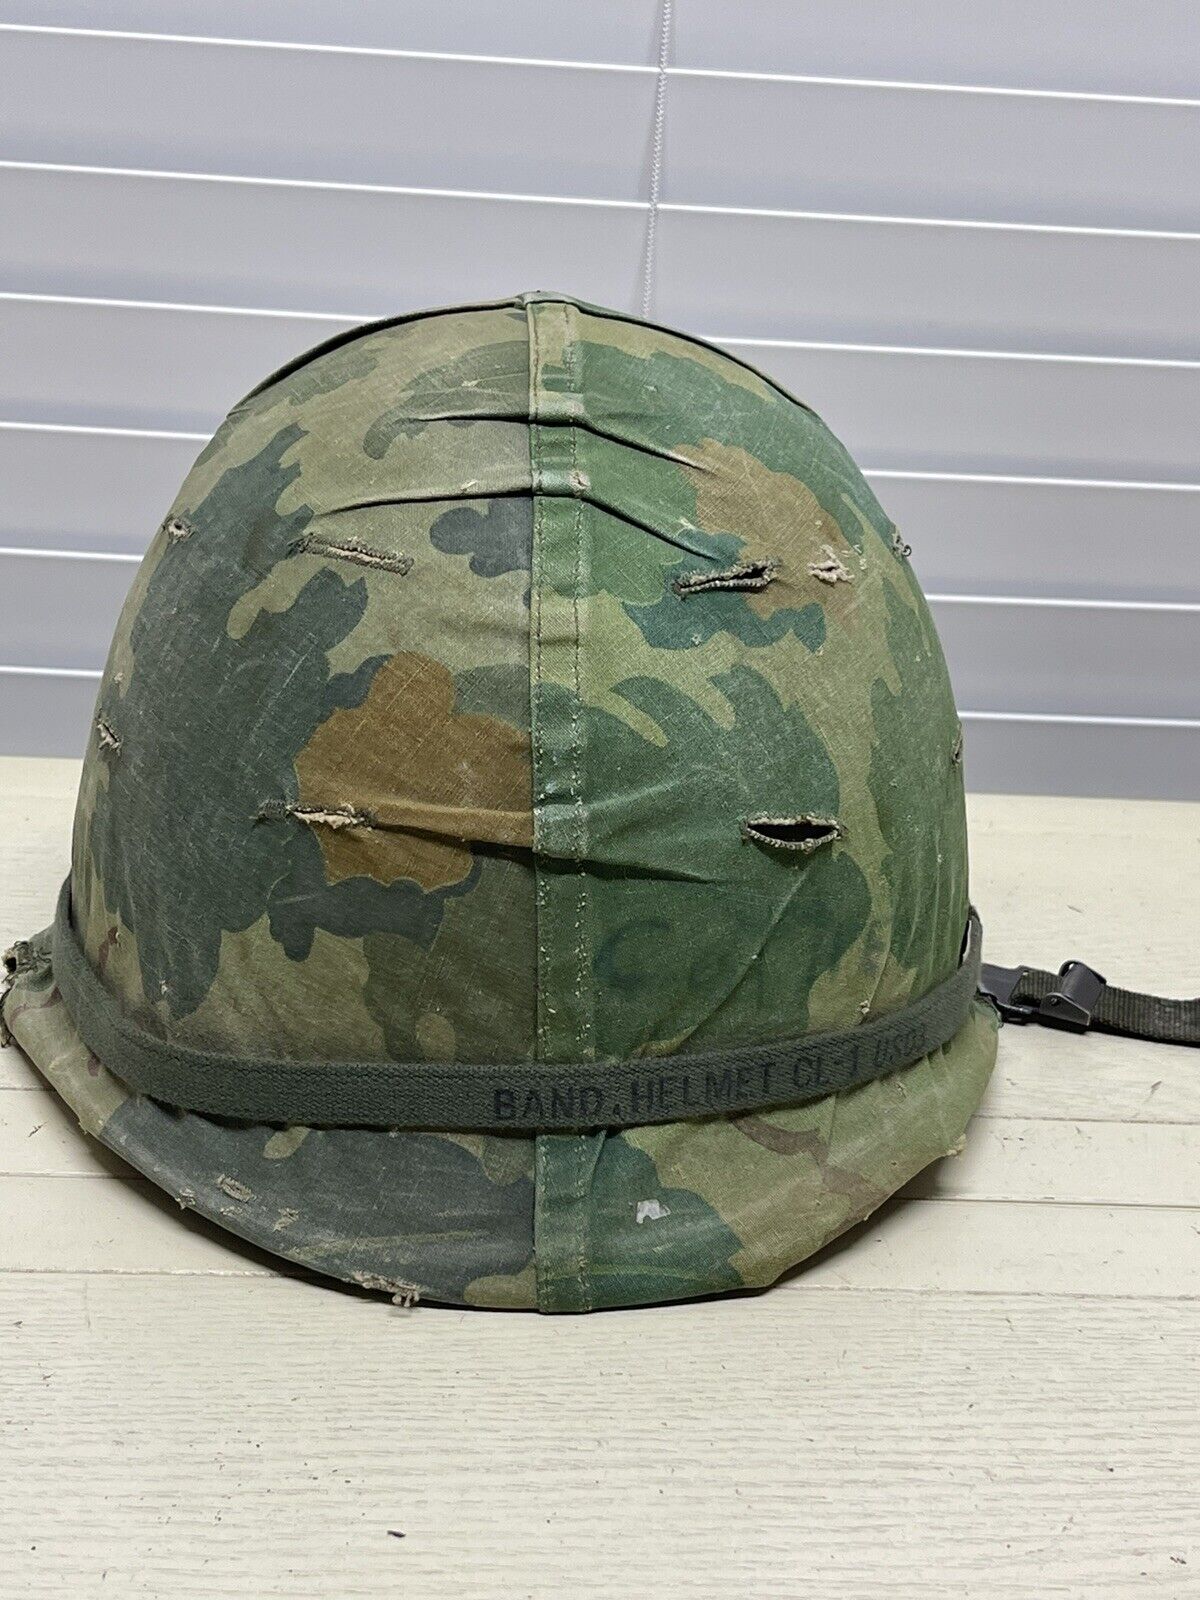 EARLY VIETNAM WAR VINTAGE US ARMY HELMET 1964 LINER AND CAMOUFLAGE COVER